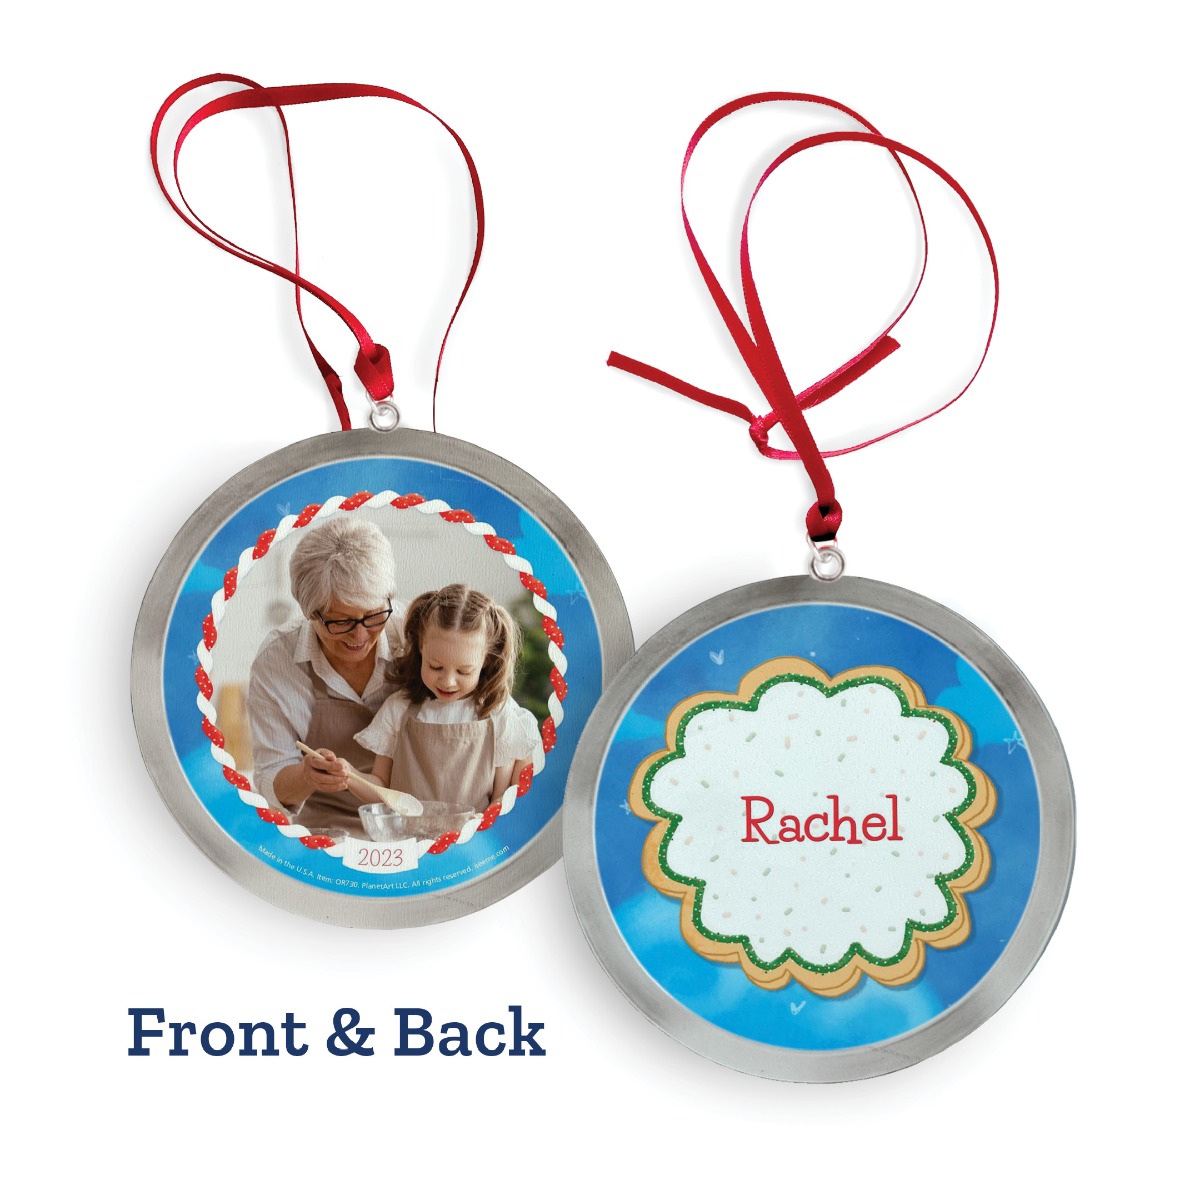 Baking Christmas Cookies Together Personalized Ornament